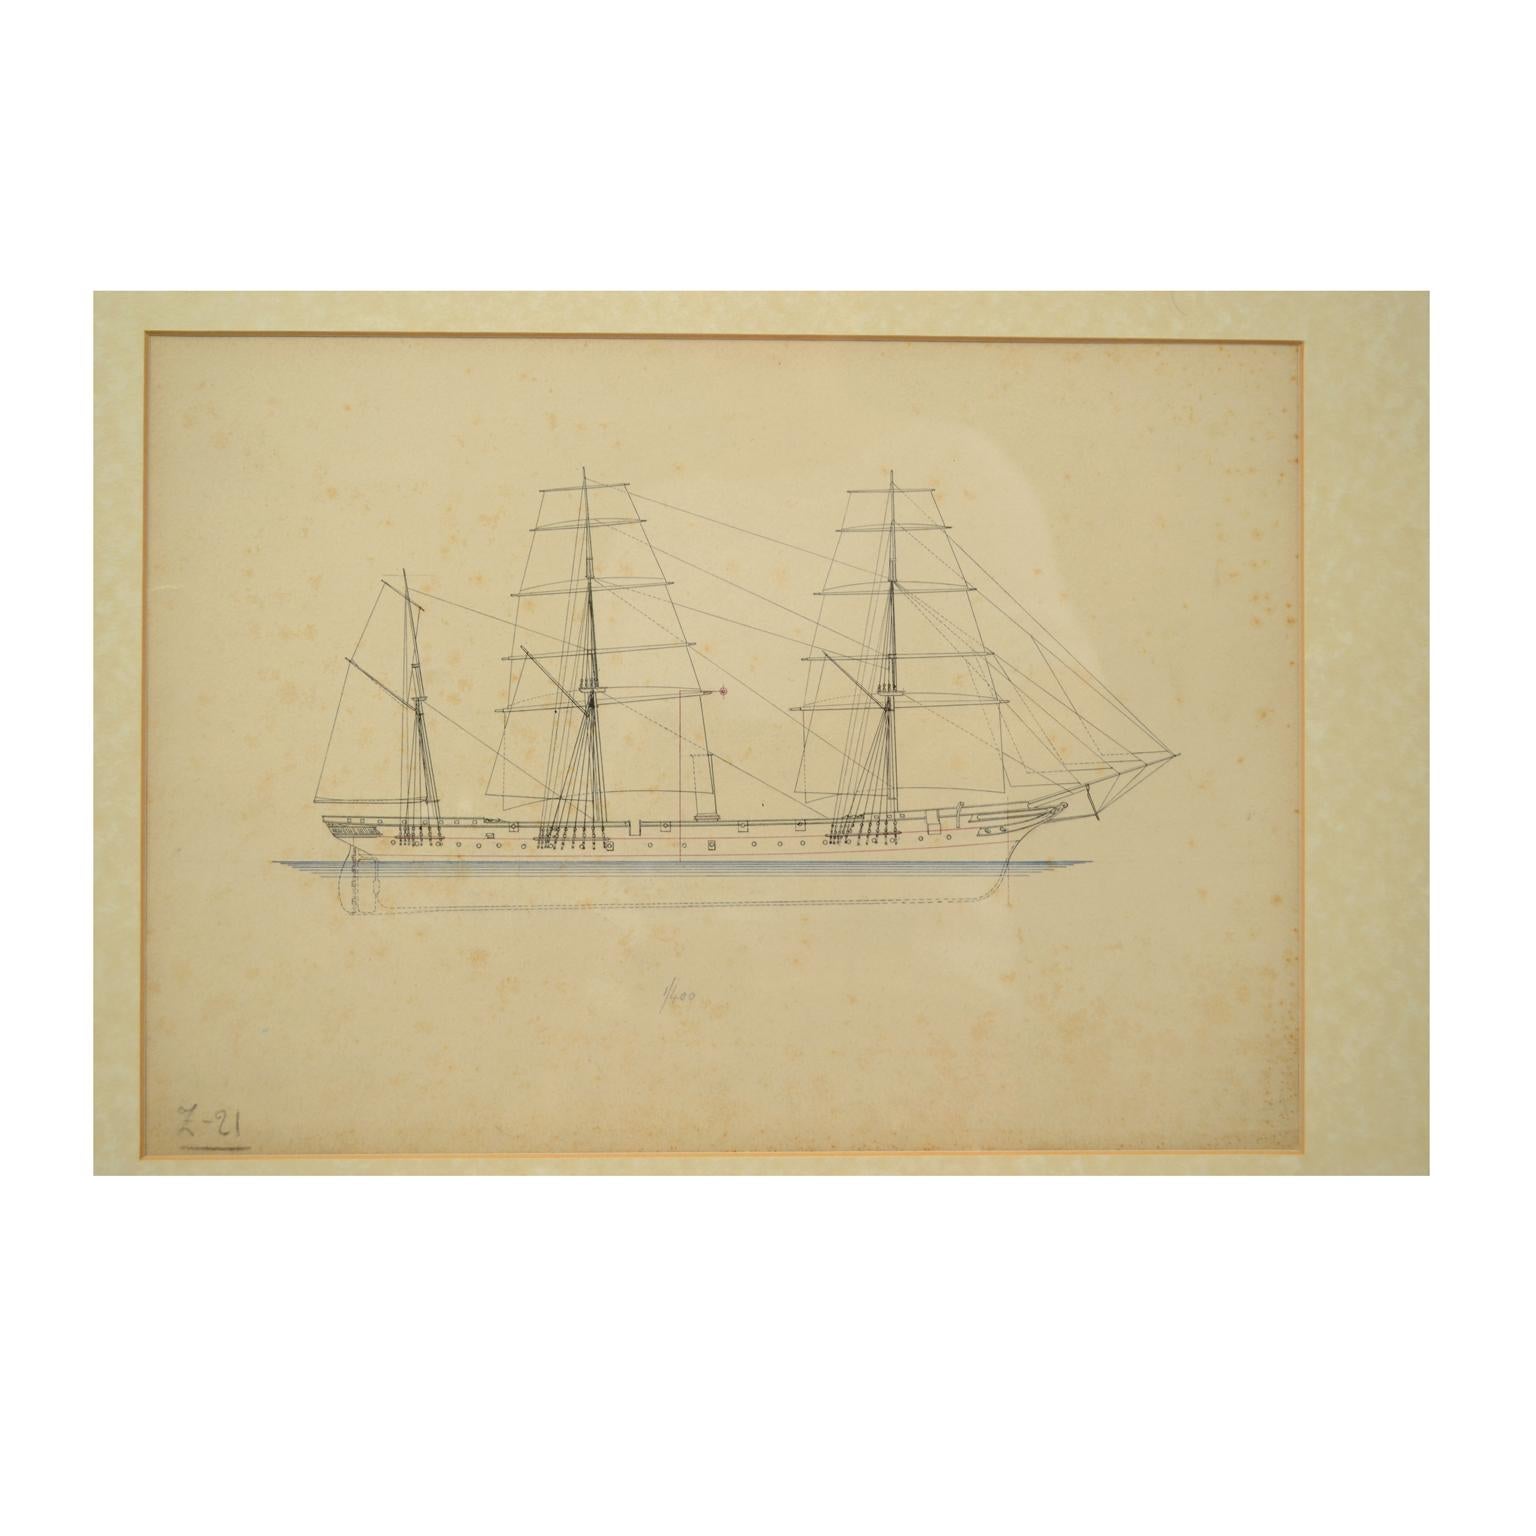 Print depicting a schooner, no. 1 of 400 copies signed Z21, made in the mid-19th century. Non-coeval briarwood frame; measures with frame 50 x 40 cm.
Shipping is insured by Lloyd's London.